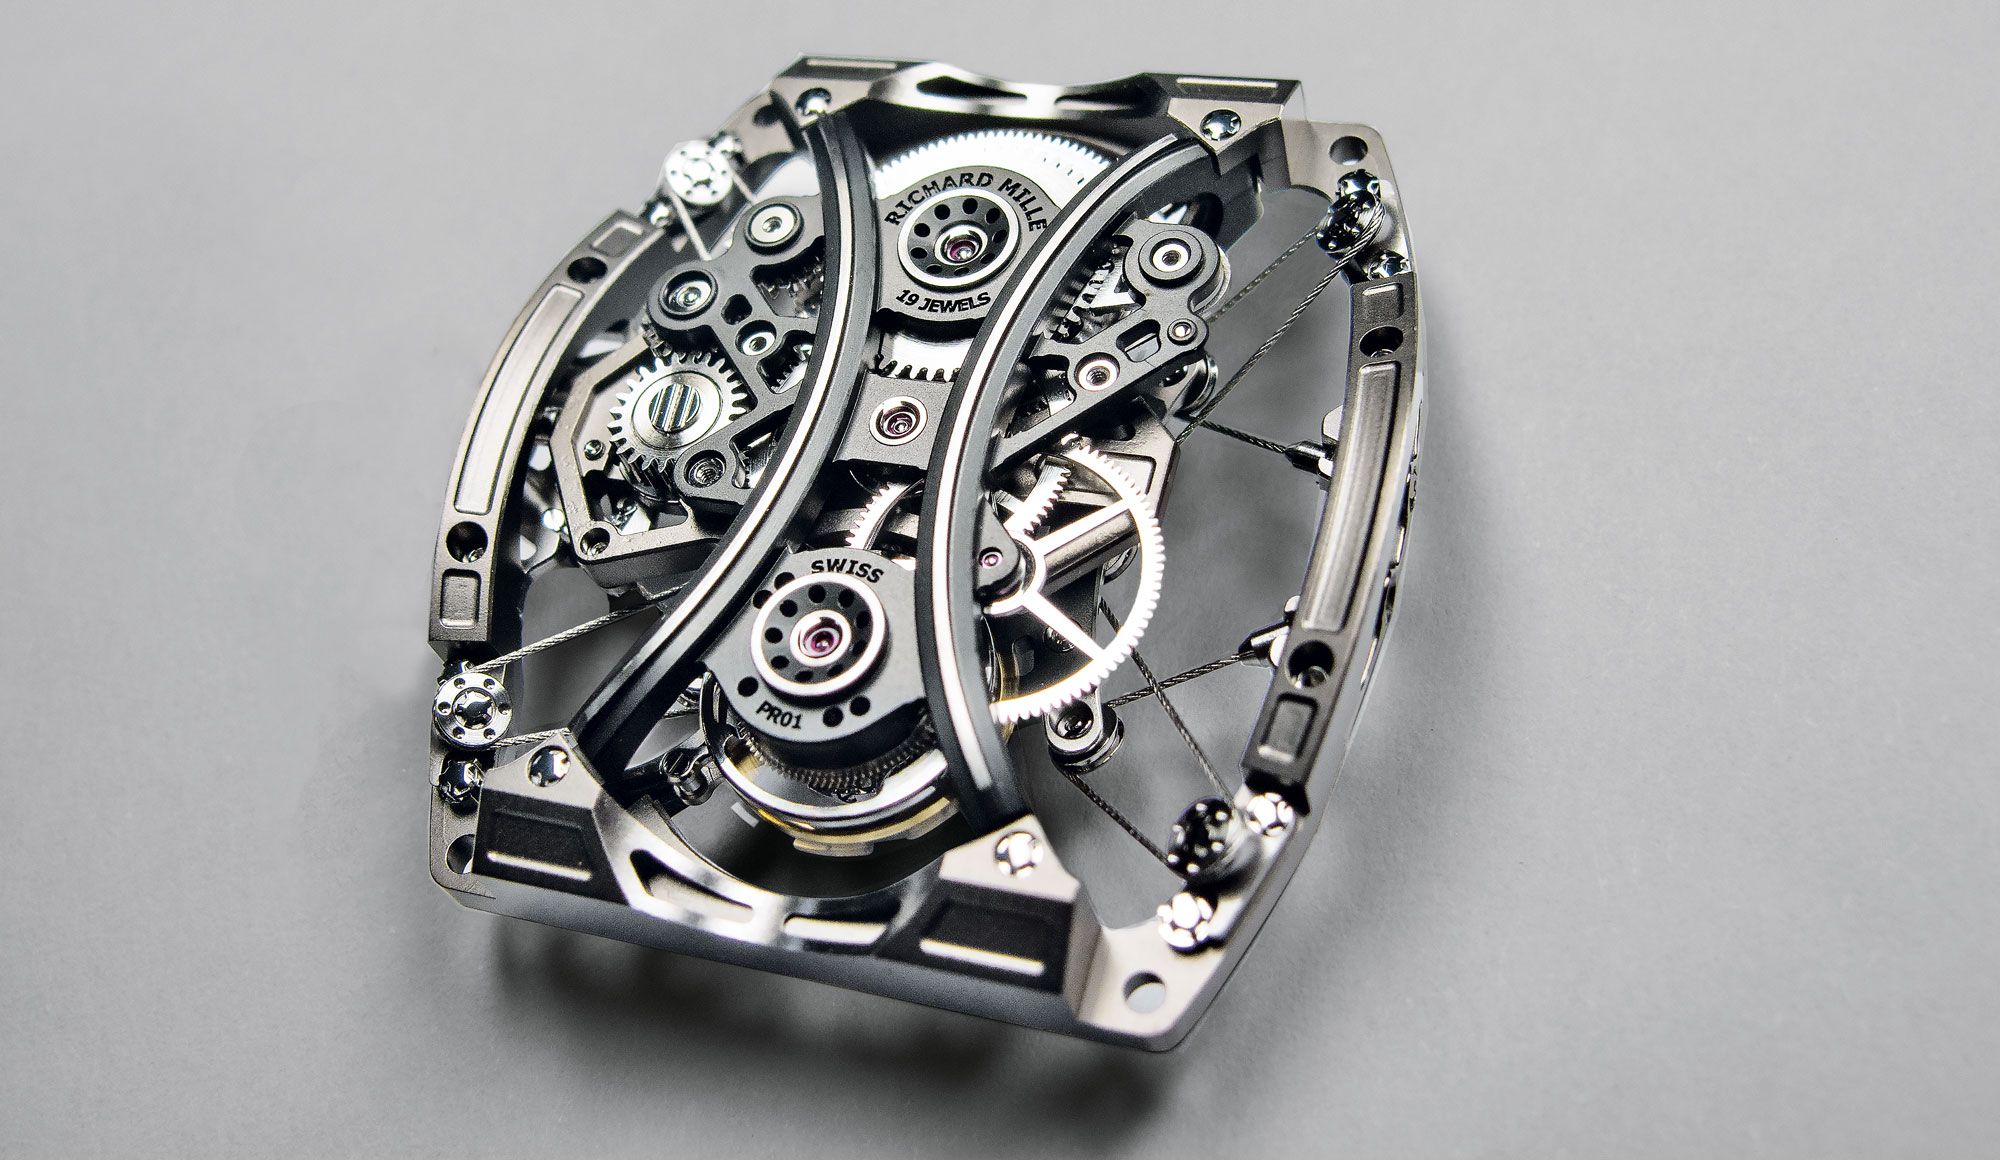 Richard Mille Rm 011-02 Automatic Winding Flyback Chronograph GMT